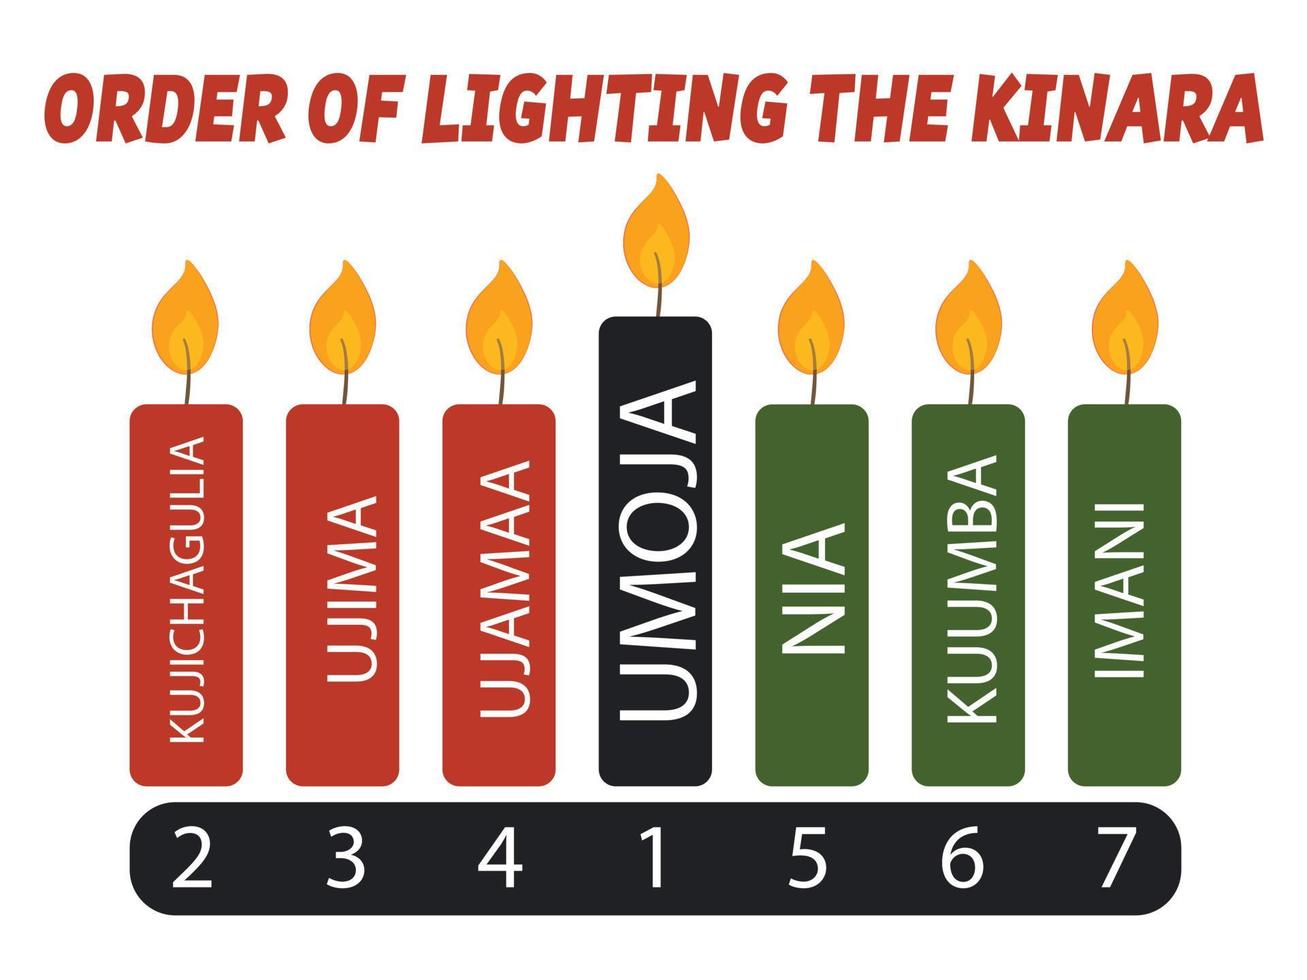 Infographic vector illustration name of principles and proper order of lightning the kinara, Kwanzaa candles. Seven candles represent 7 principles of Kwanzaa.